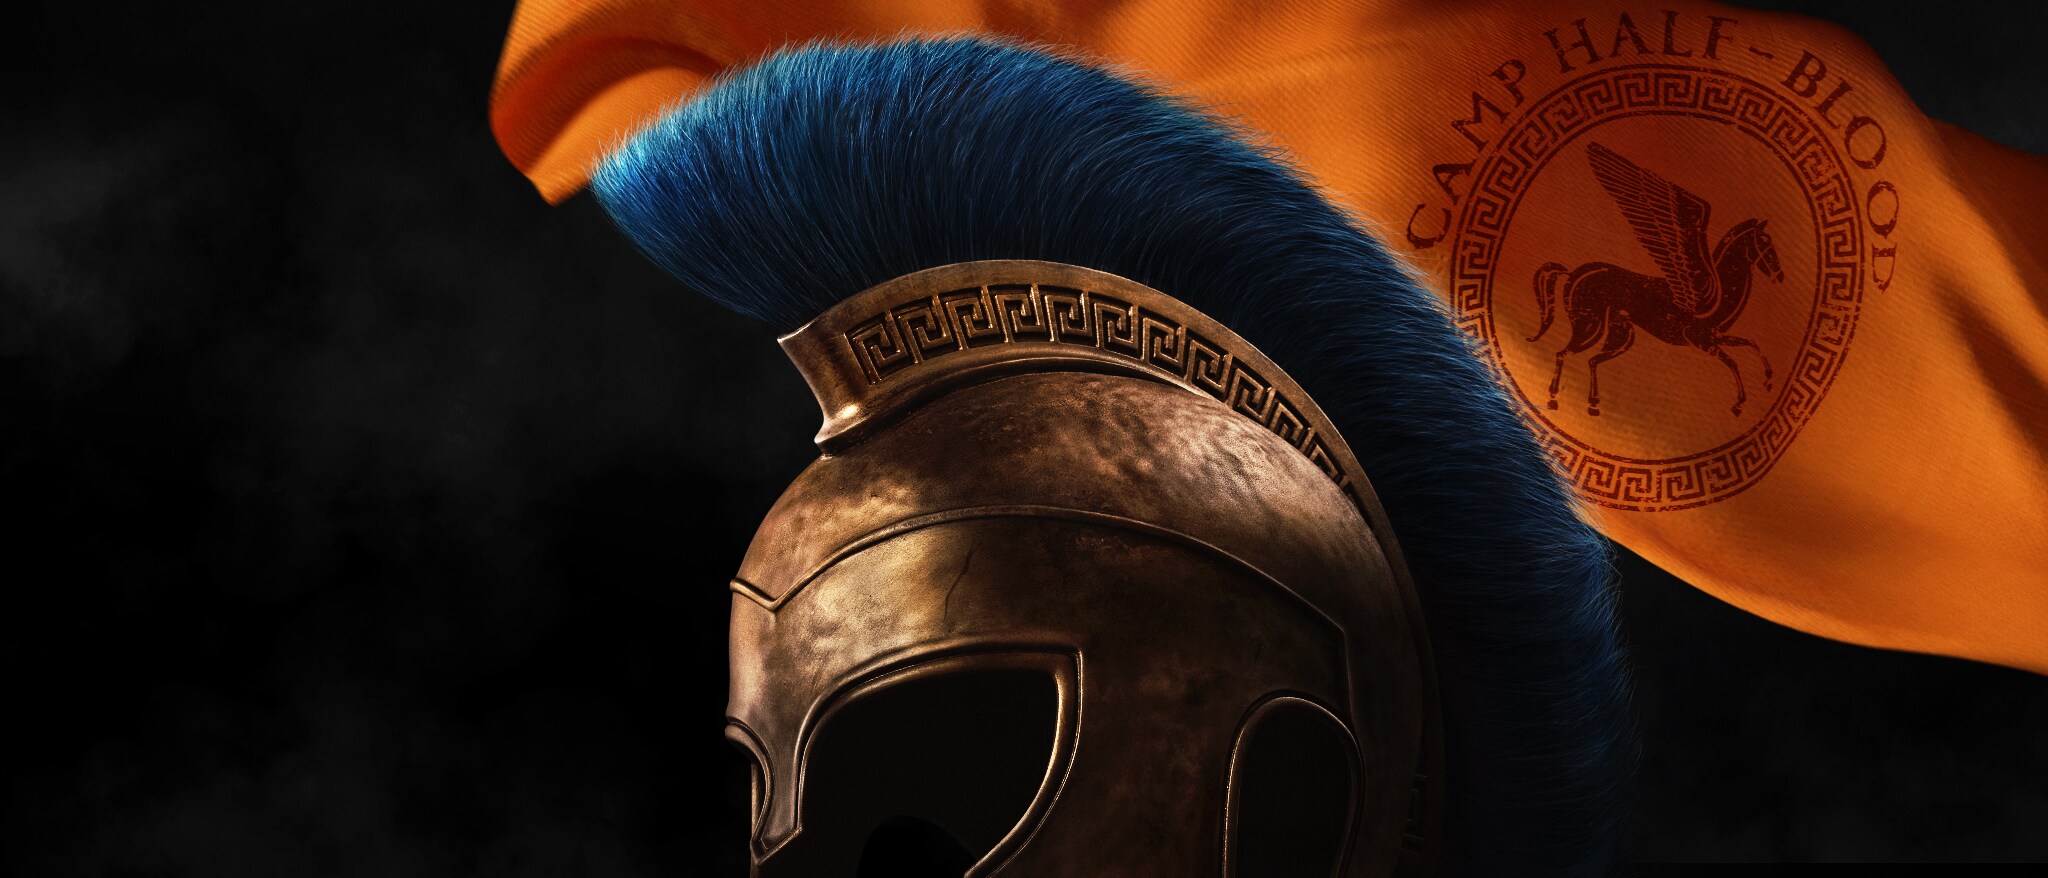 Percy Jackson and The Olympians - Featured Content Banner